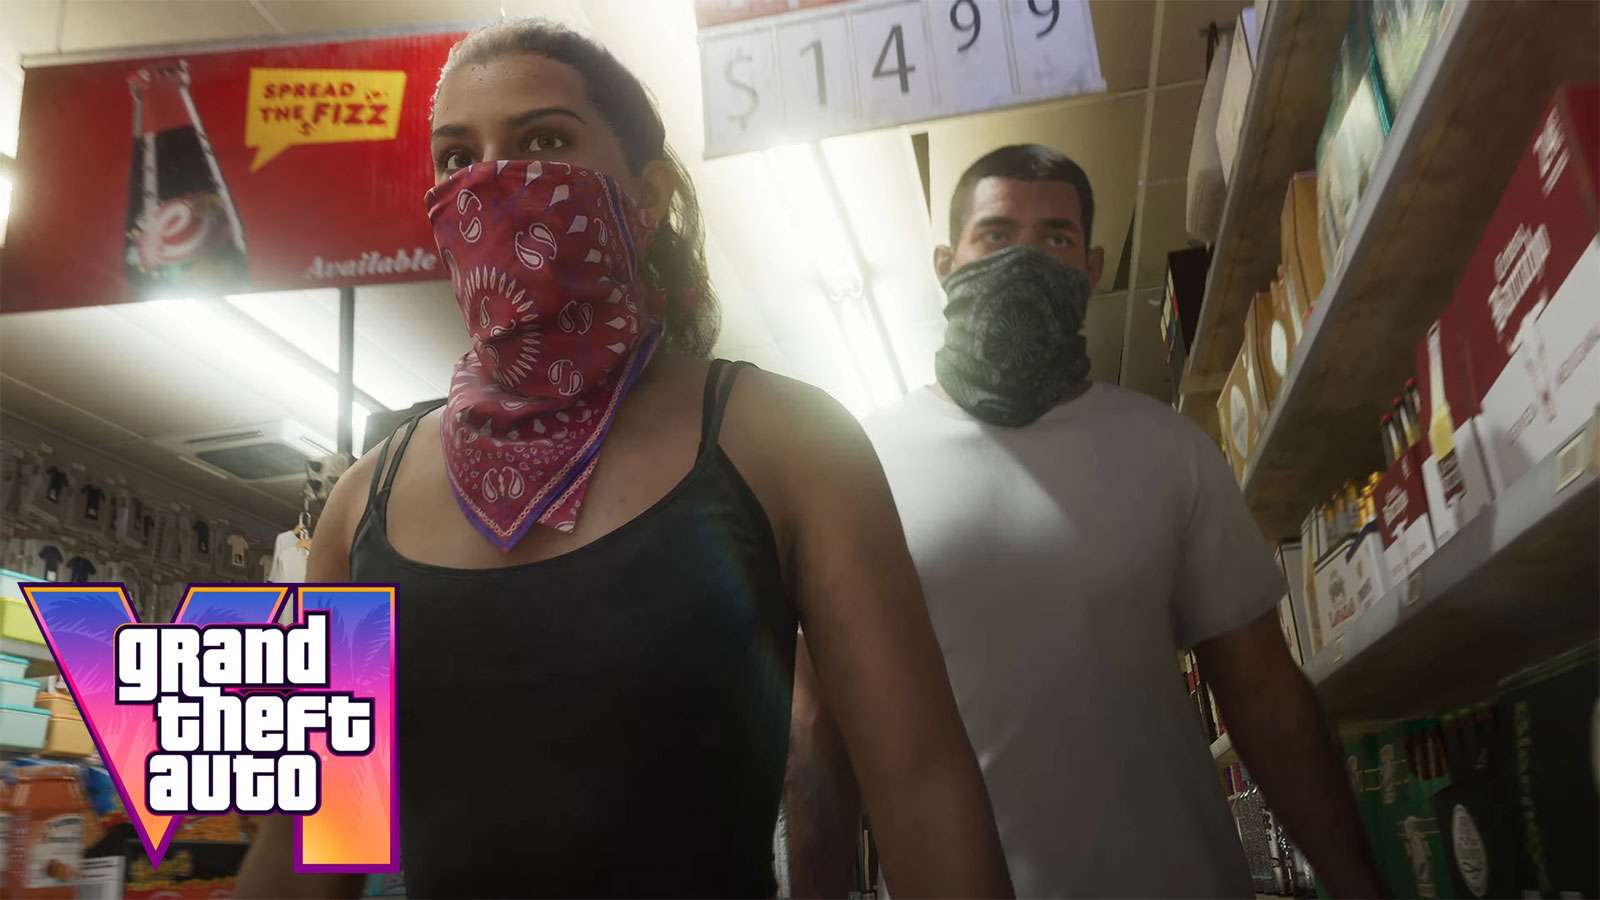 GTA 6 protagonists in store wearing bandana mask over their face